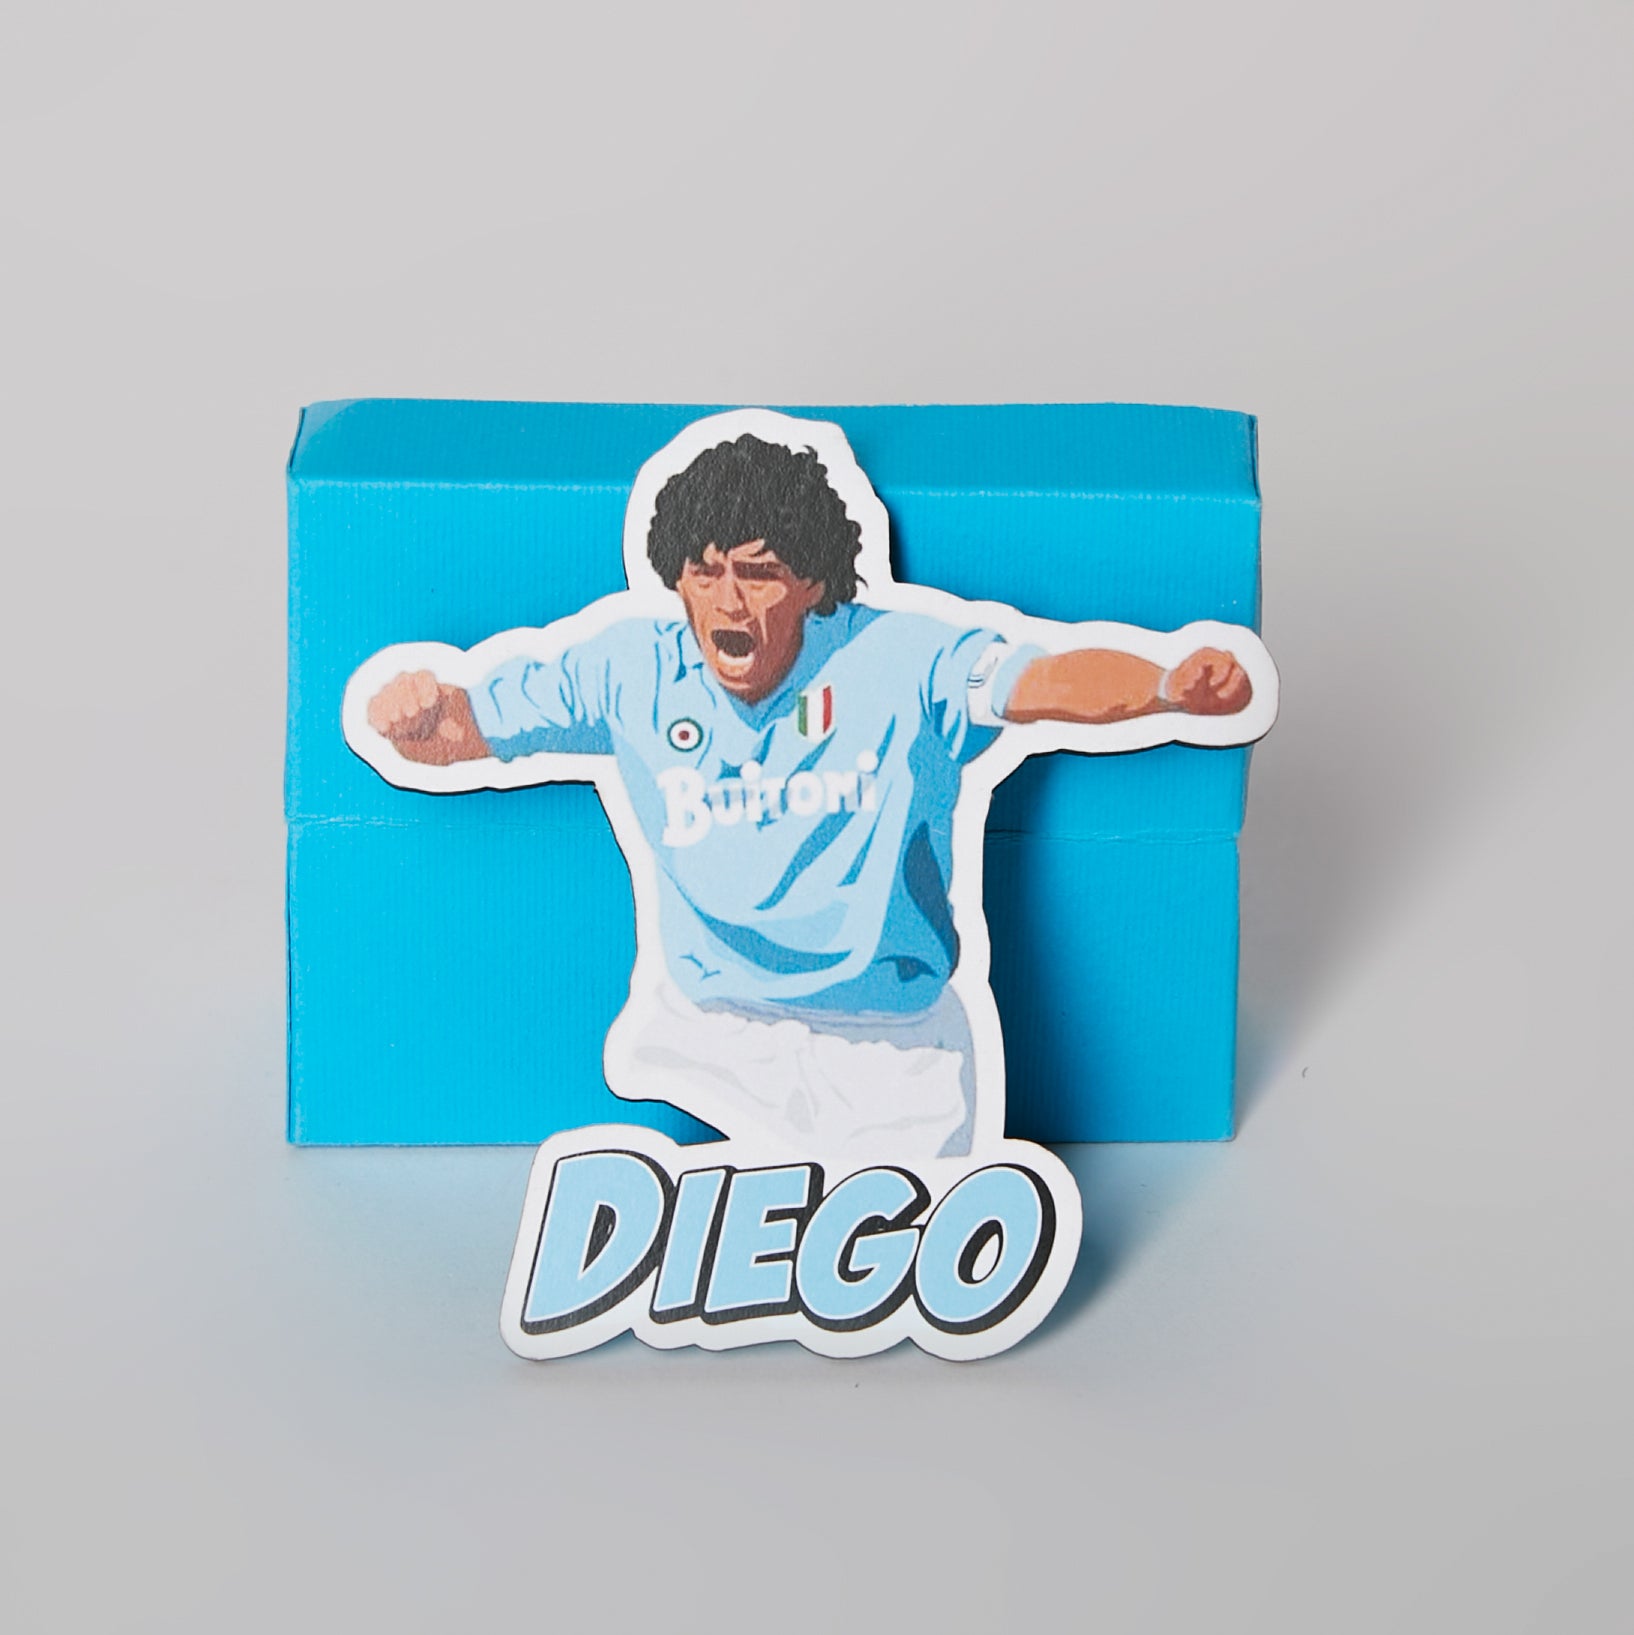 DIEGO SHAPED MAGNET